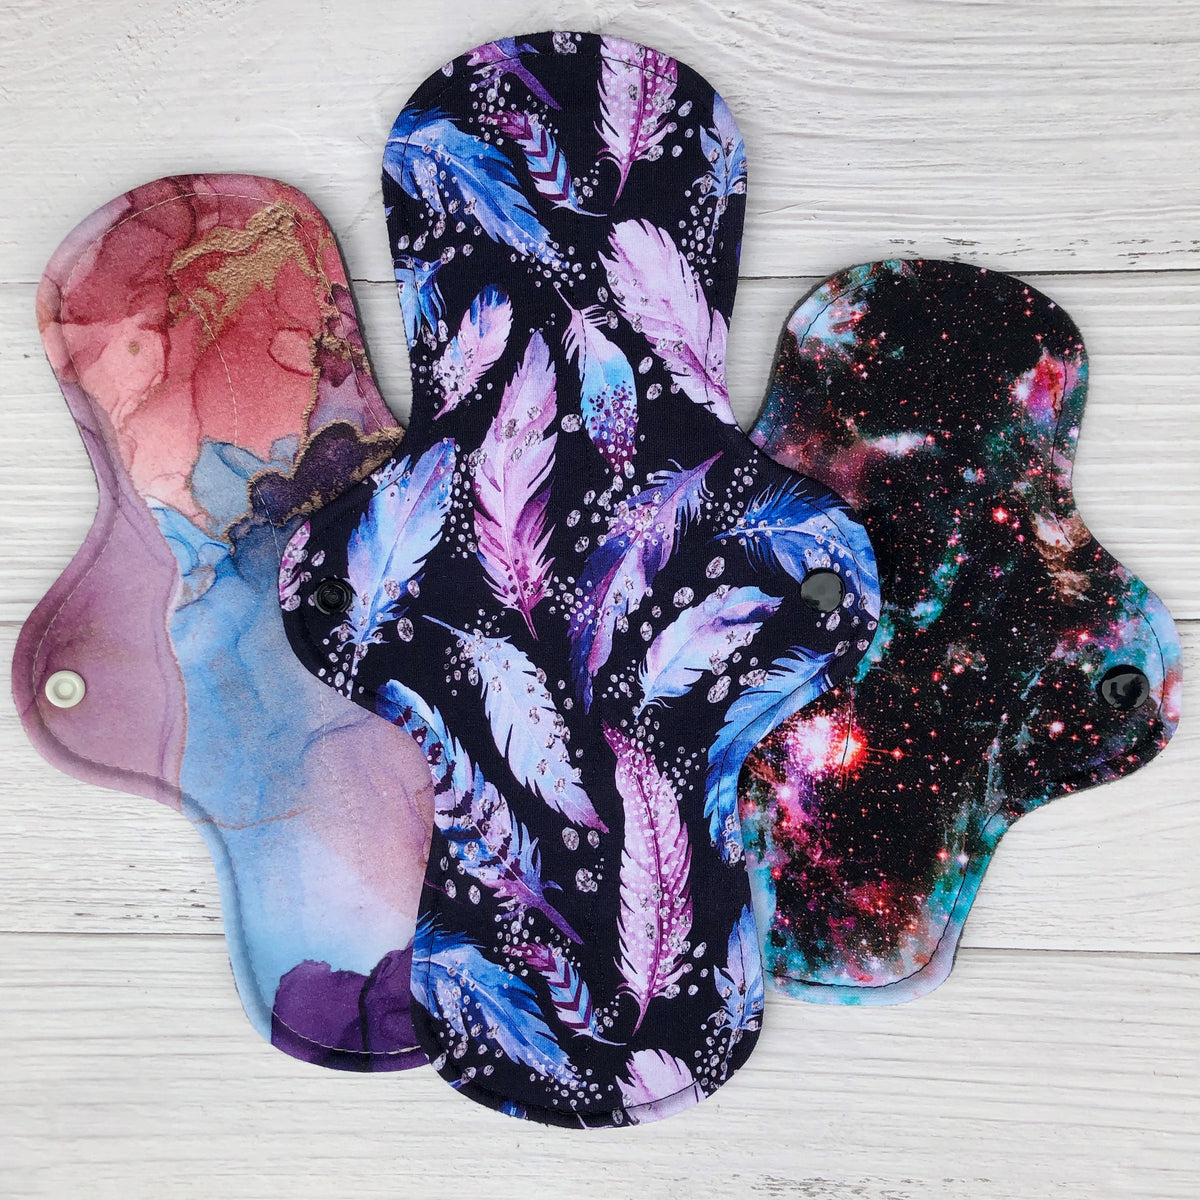 set of 3 reusable pads in prints of amtheyst purple and blue feathers and marble galaxy with black snaps on rustic wood background